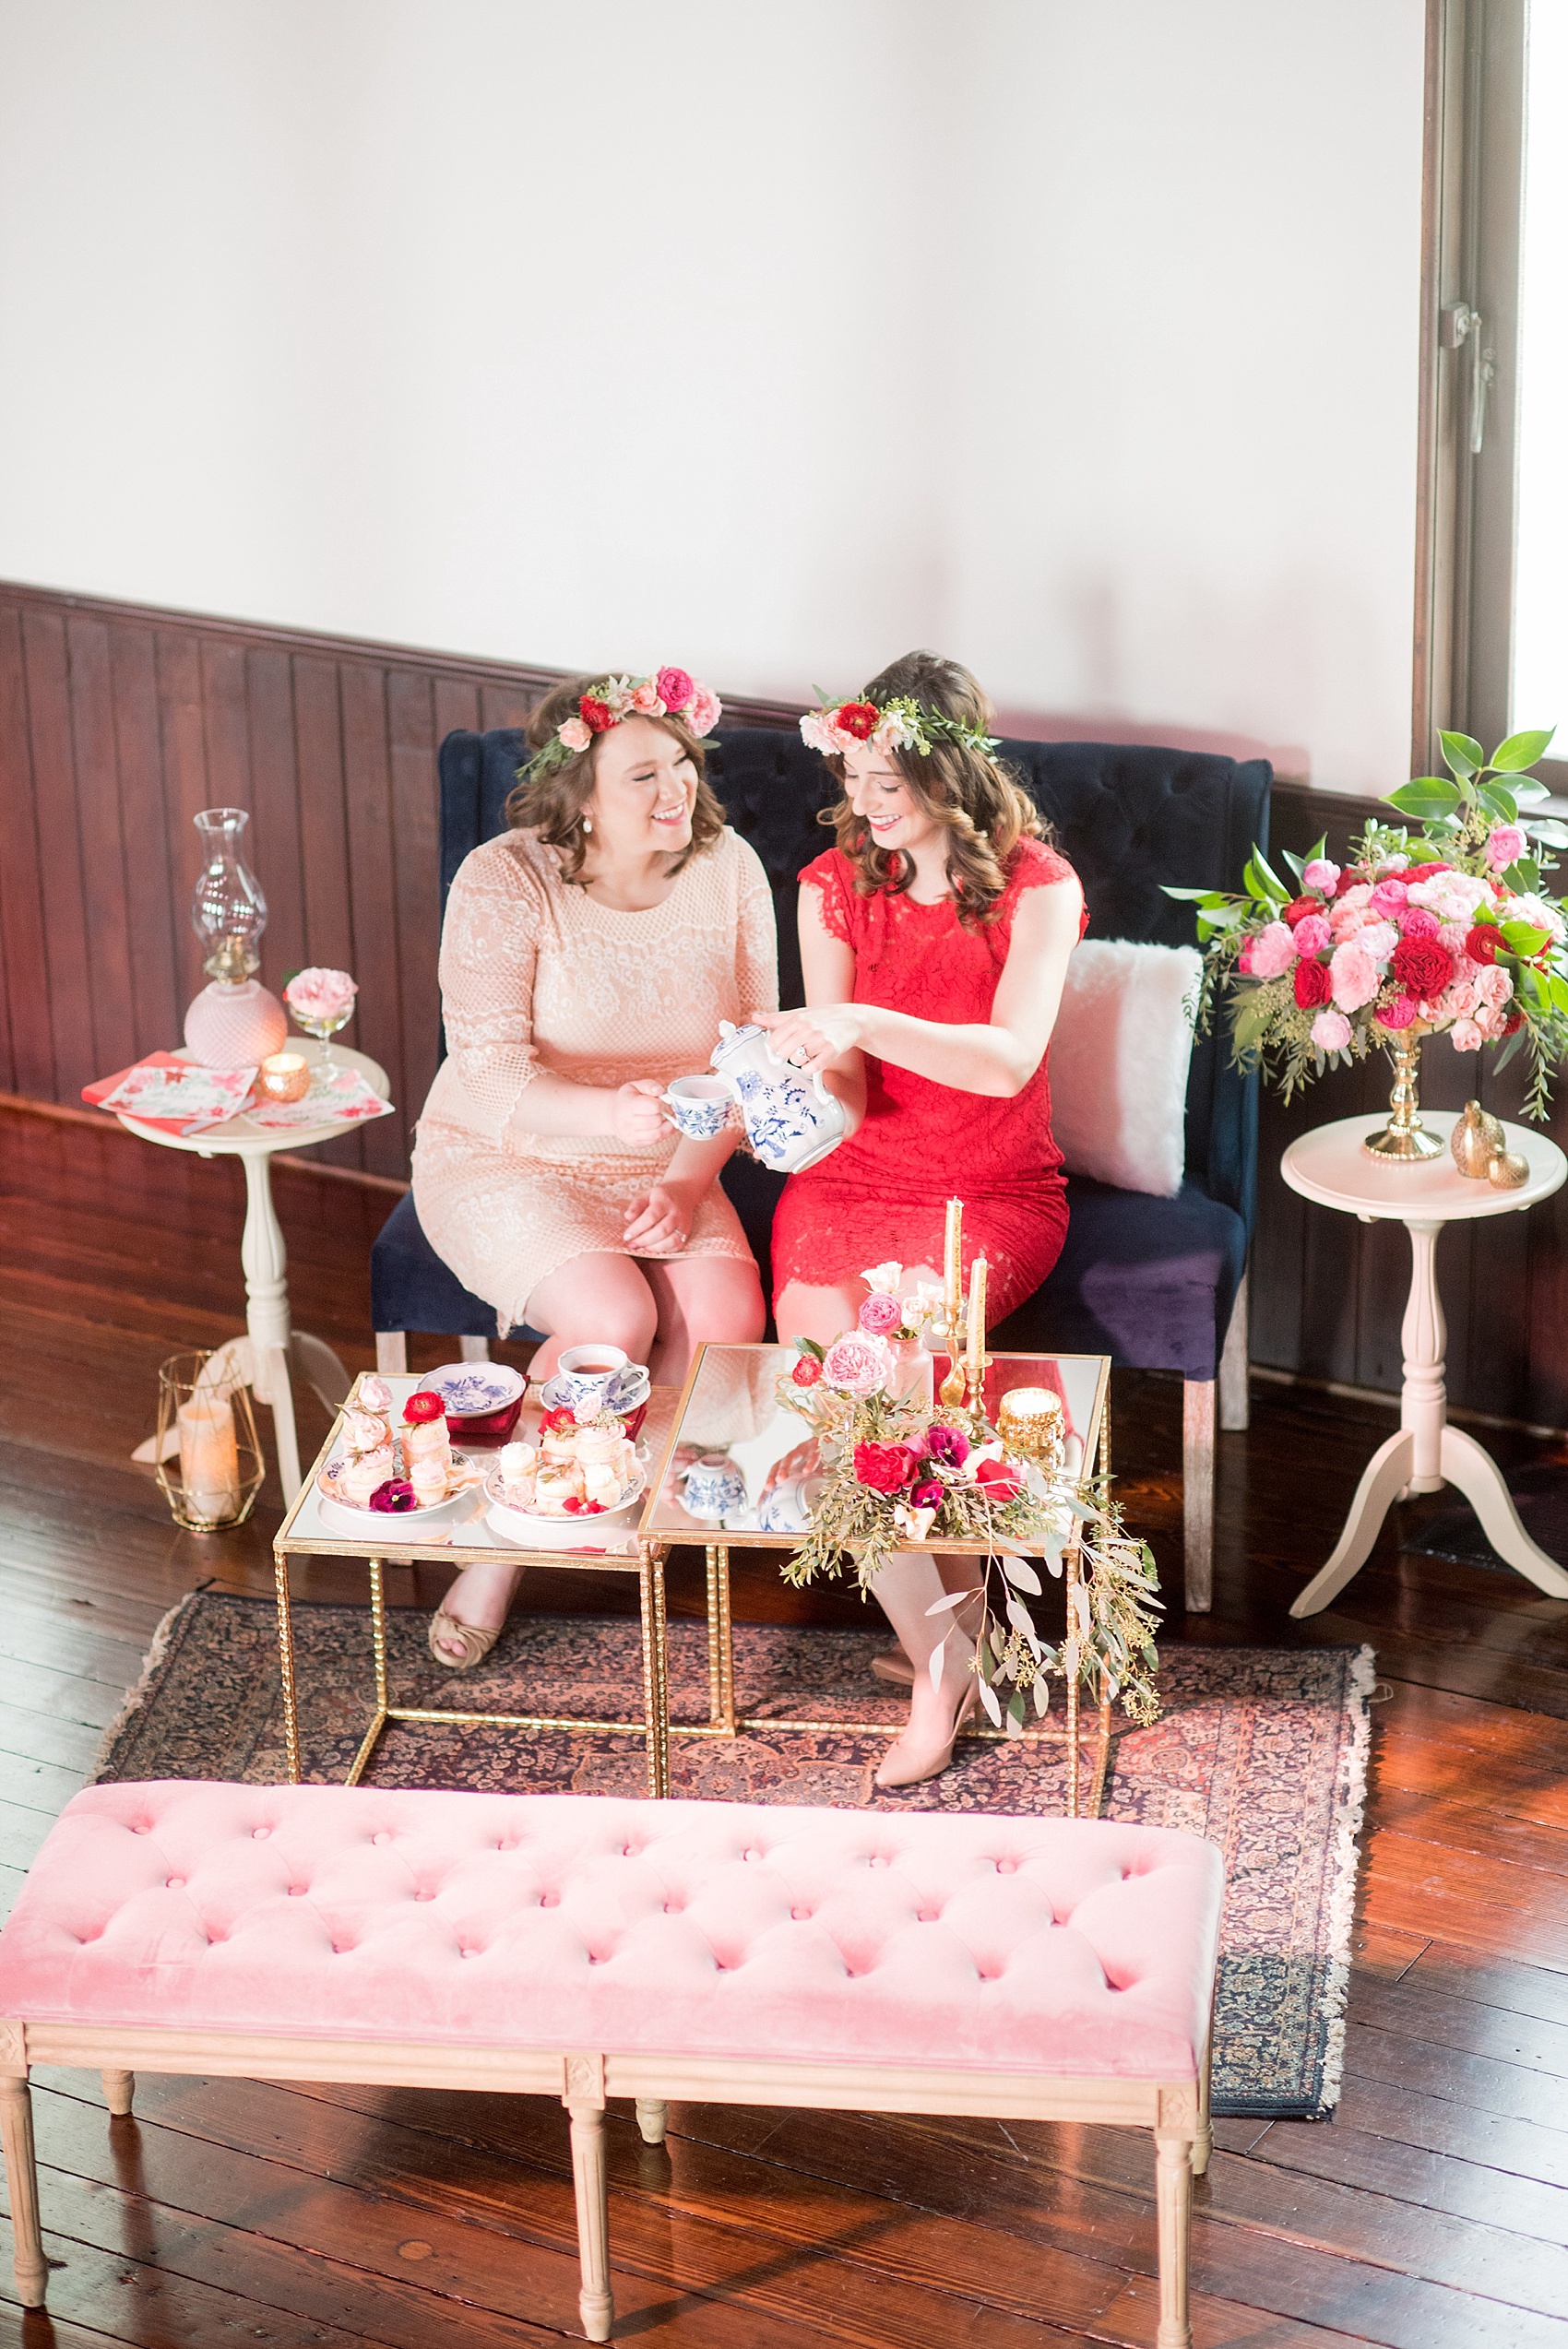 All Saints Chapel Raleigh bridal photos with an inspirational tea for Galentine's Day with pink and red cakelets.